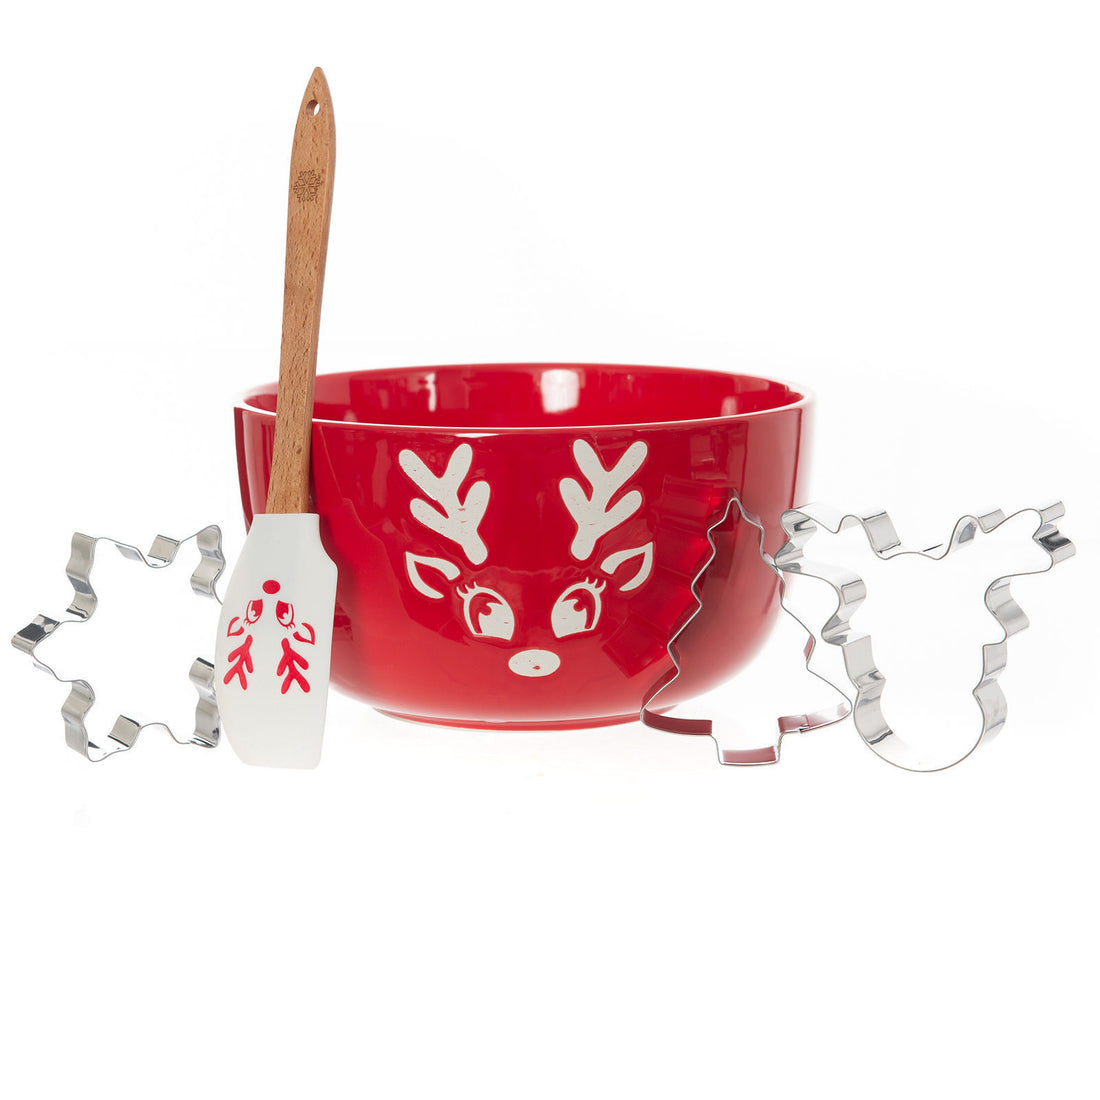 Bread and Butter Electroplate Icy Reindeer Mini Mix Bowl Set-Decorations-PEROZ Accessories